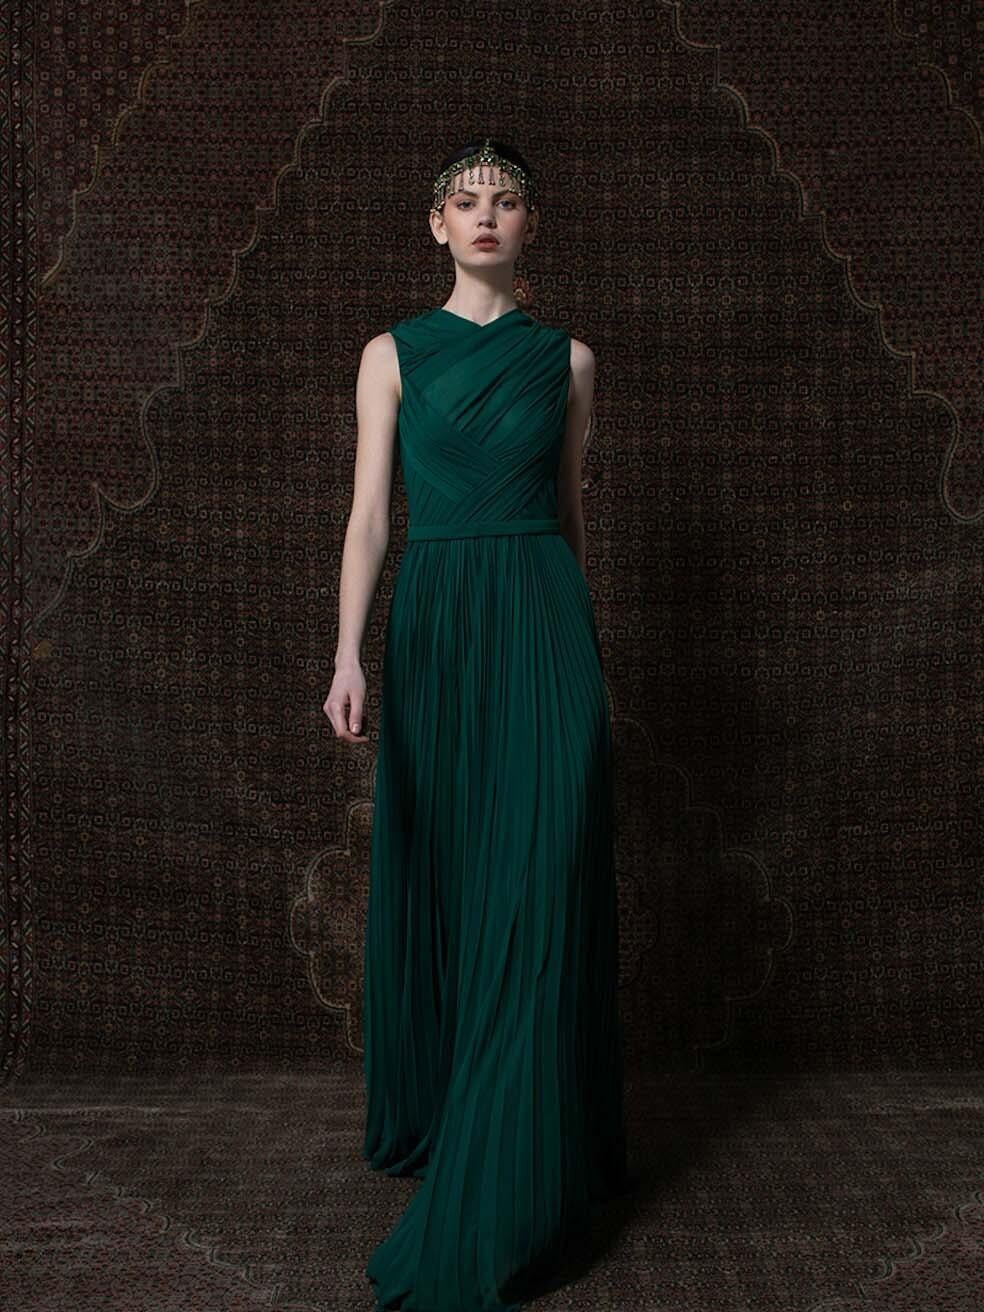 CONDITION is Never Worn With Tag. Minimal wear to dress is evident. Minimal wear to the exterior with plucks to the weave found at centre front body on this used Honayda designer resale item.
 
 
 
 Details
 
 
 AW22
 
 Green
 
 Polyester
 
 Maxi